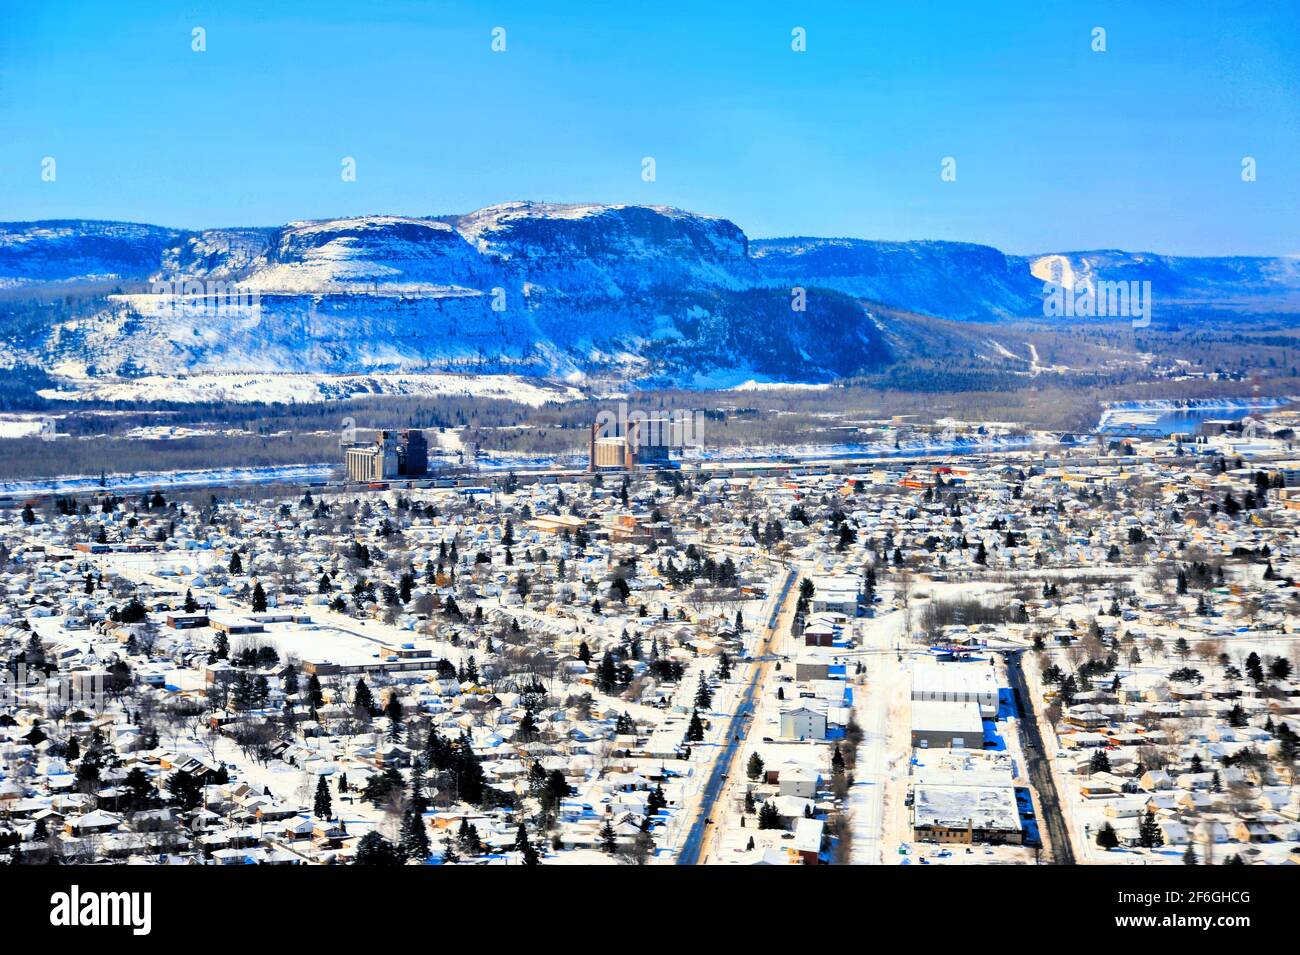 South Eastern part of the city of Thunder Bay, Ontario, Canada, from the air after a late snowfall. Stock Photo